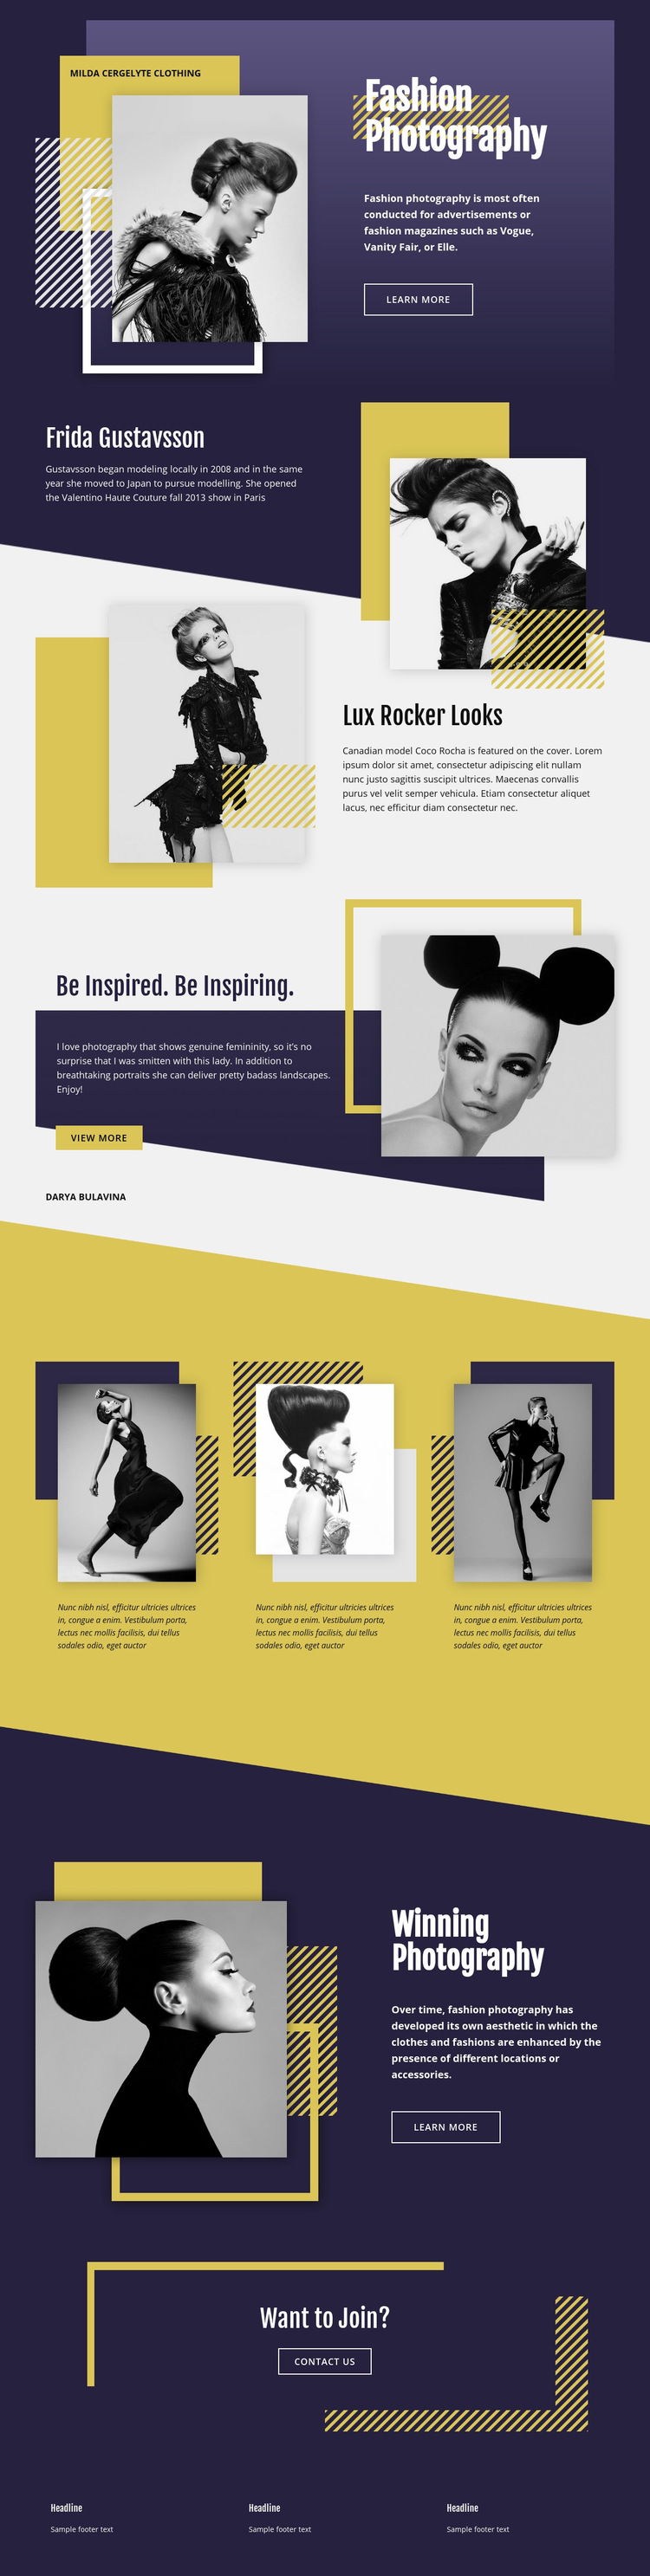 Fashion Photography Overlapping Web Page Design